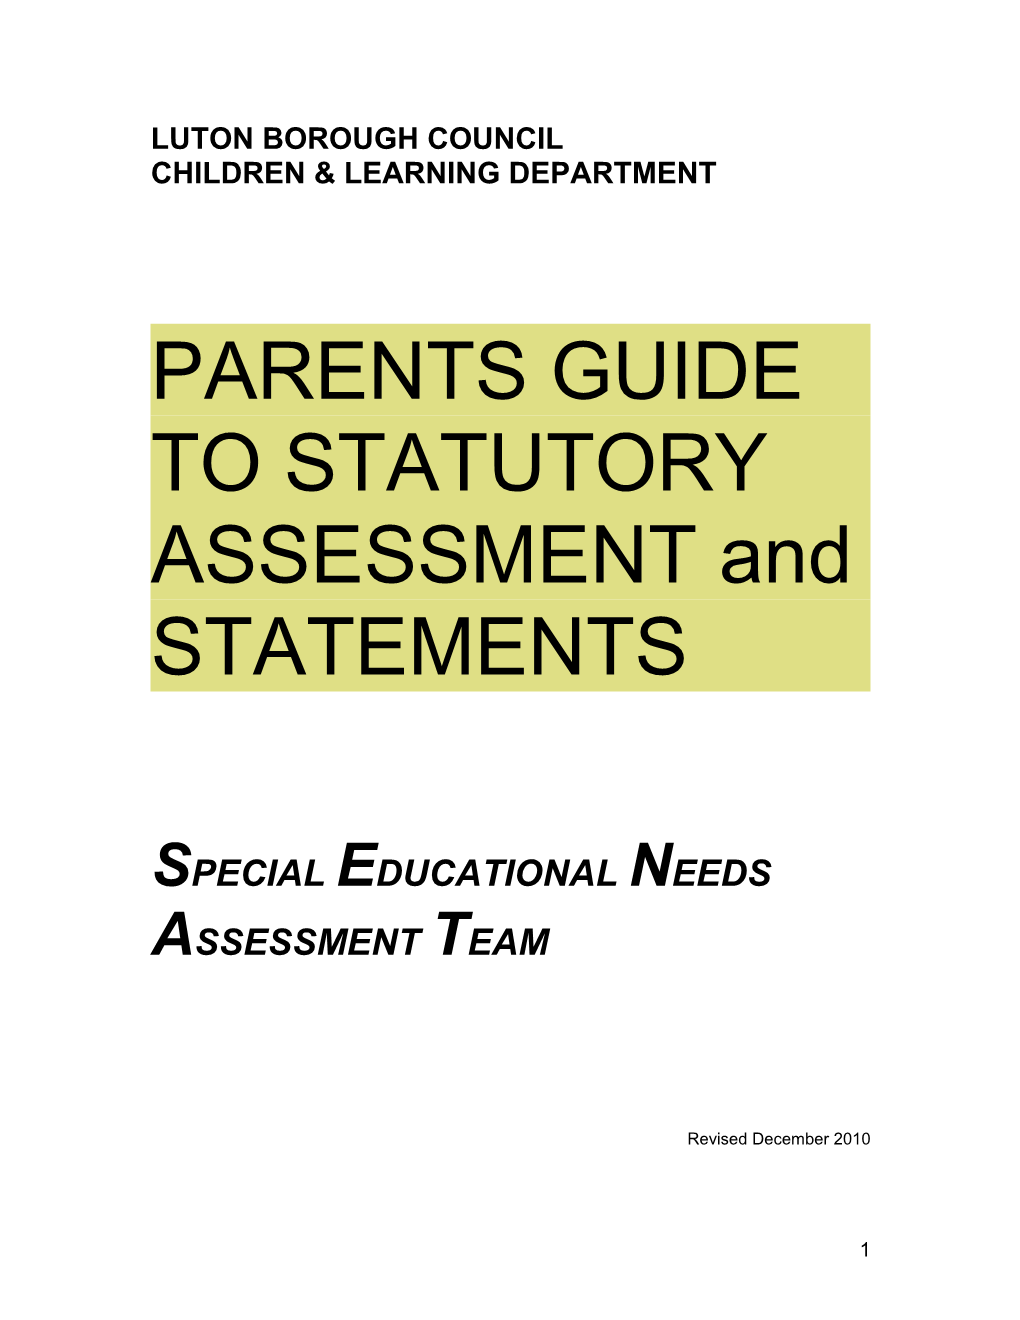 Parents Guide to Statutory Assessment and Statements